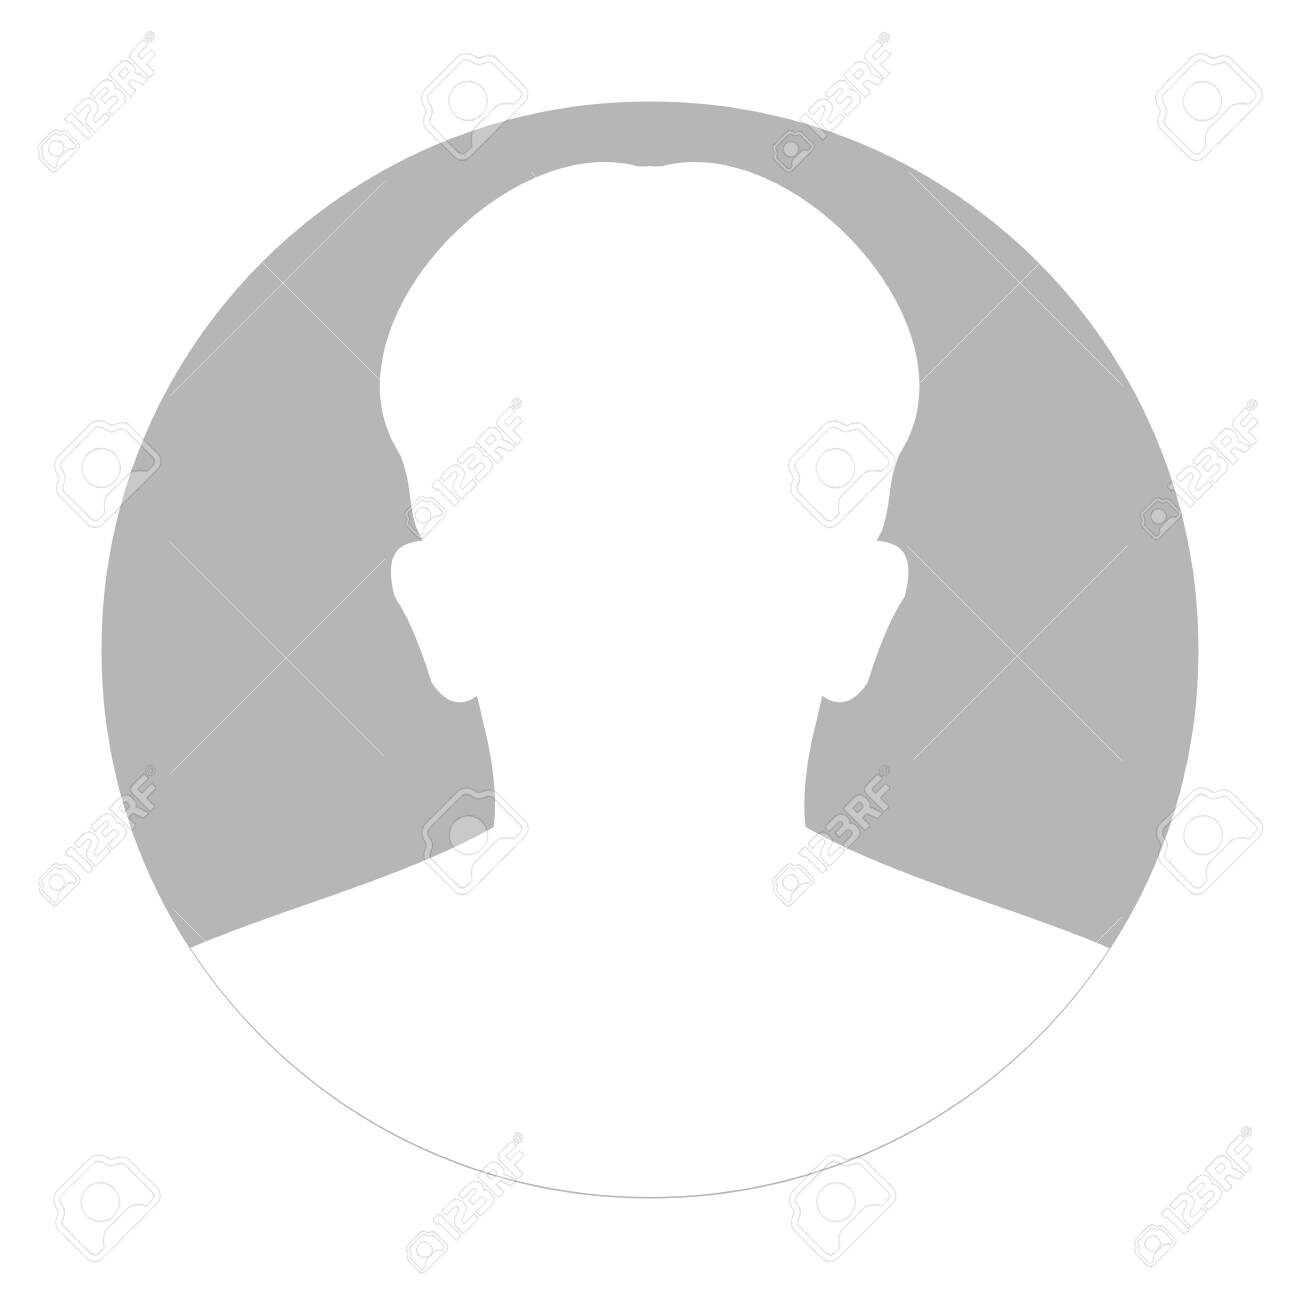 Profile anonymous face icon. Gray silhouette person. Male default avatar. Photo placeholder. Isolated on white background. Vector illustration